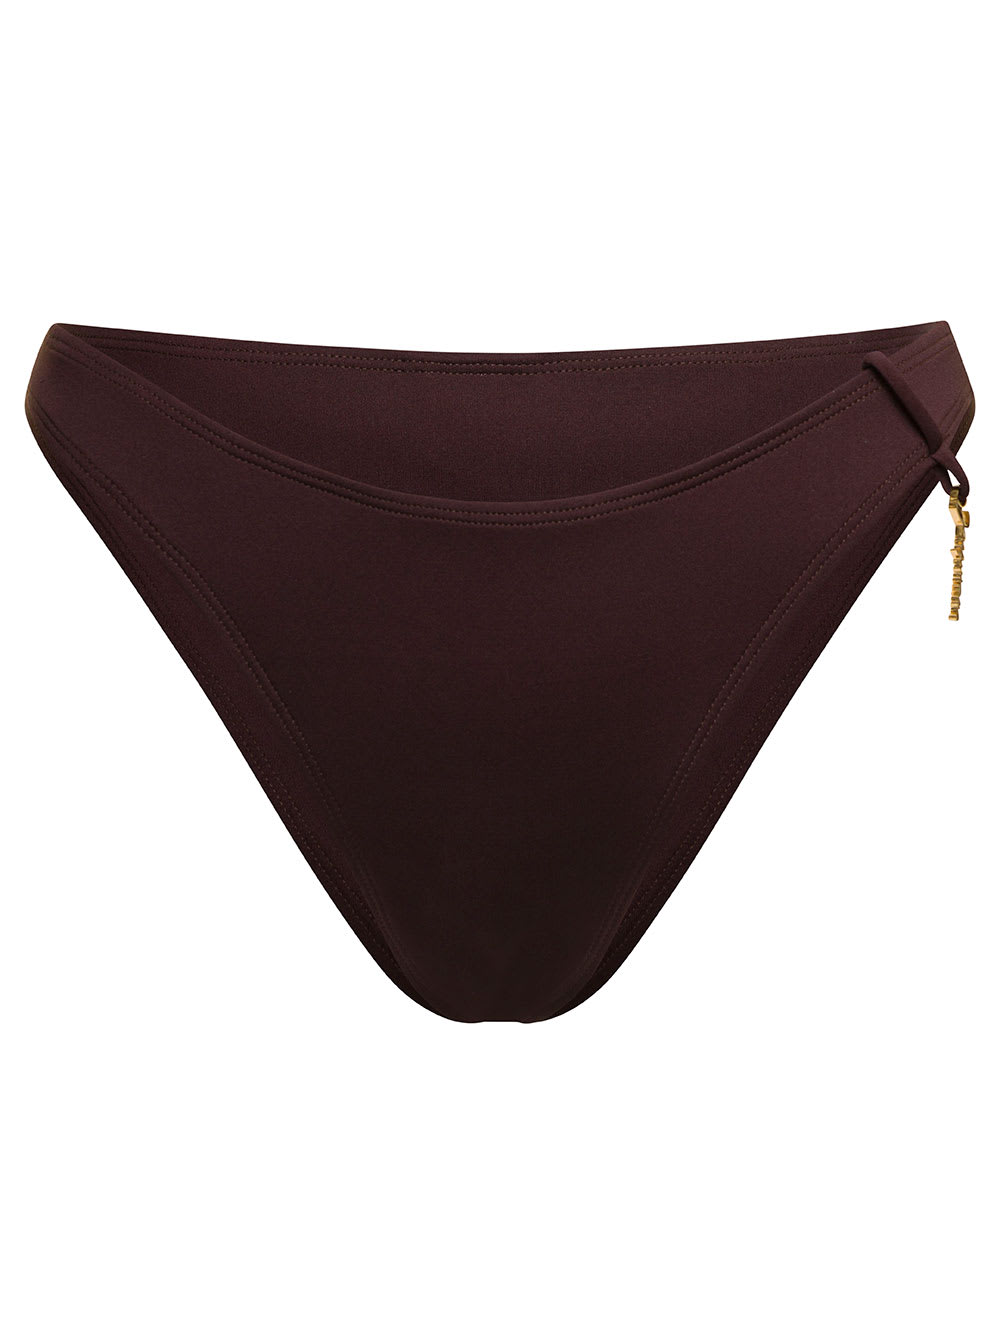 JACQUEMUS LE BAS DE MAILLOT SIGNATURE BROWN BIKINI BOTTOM IN RECYCLED POLYESTER WOMAN